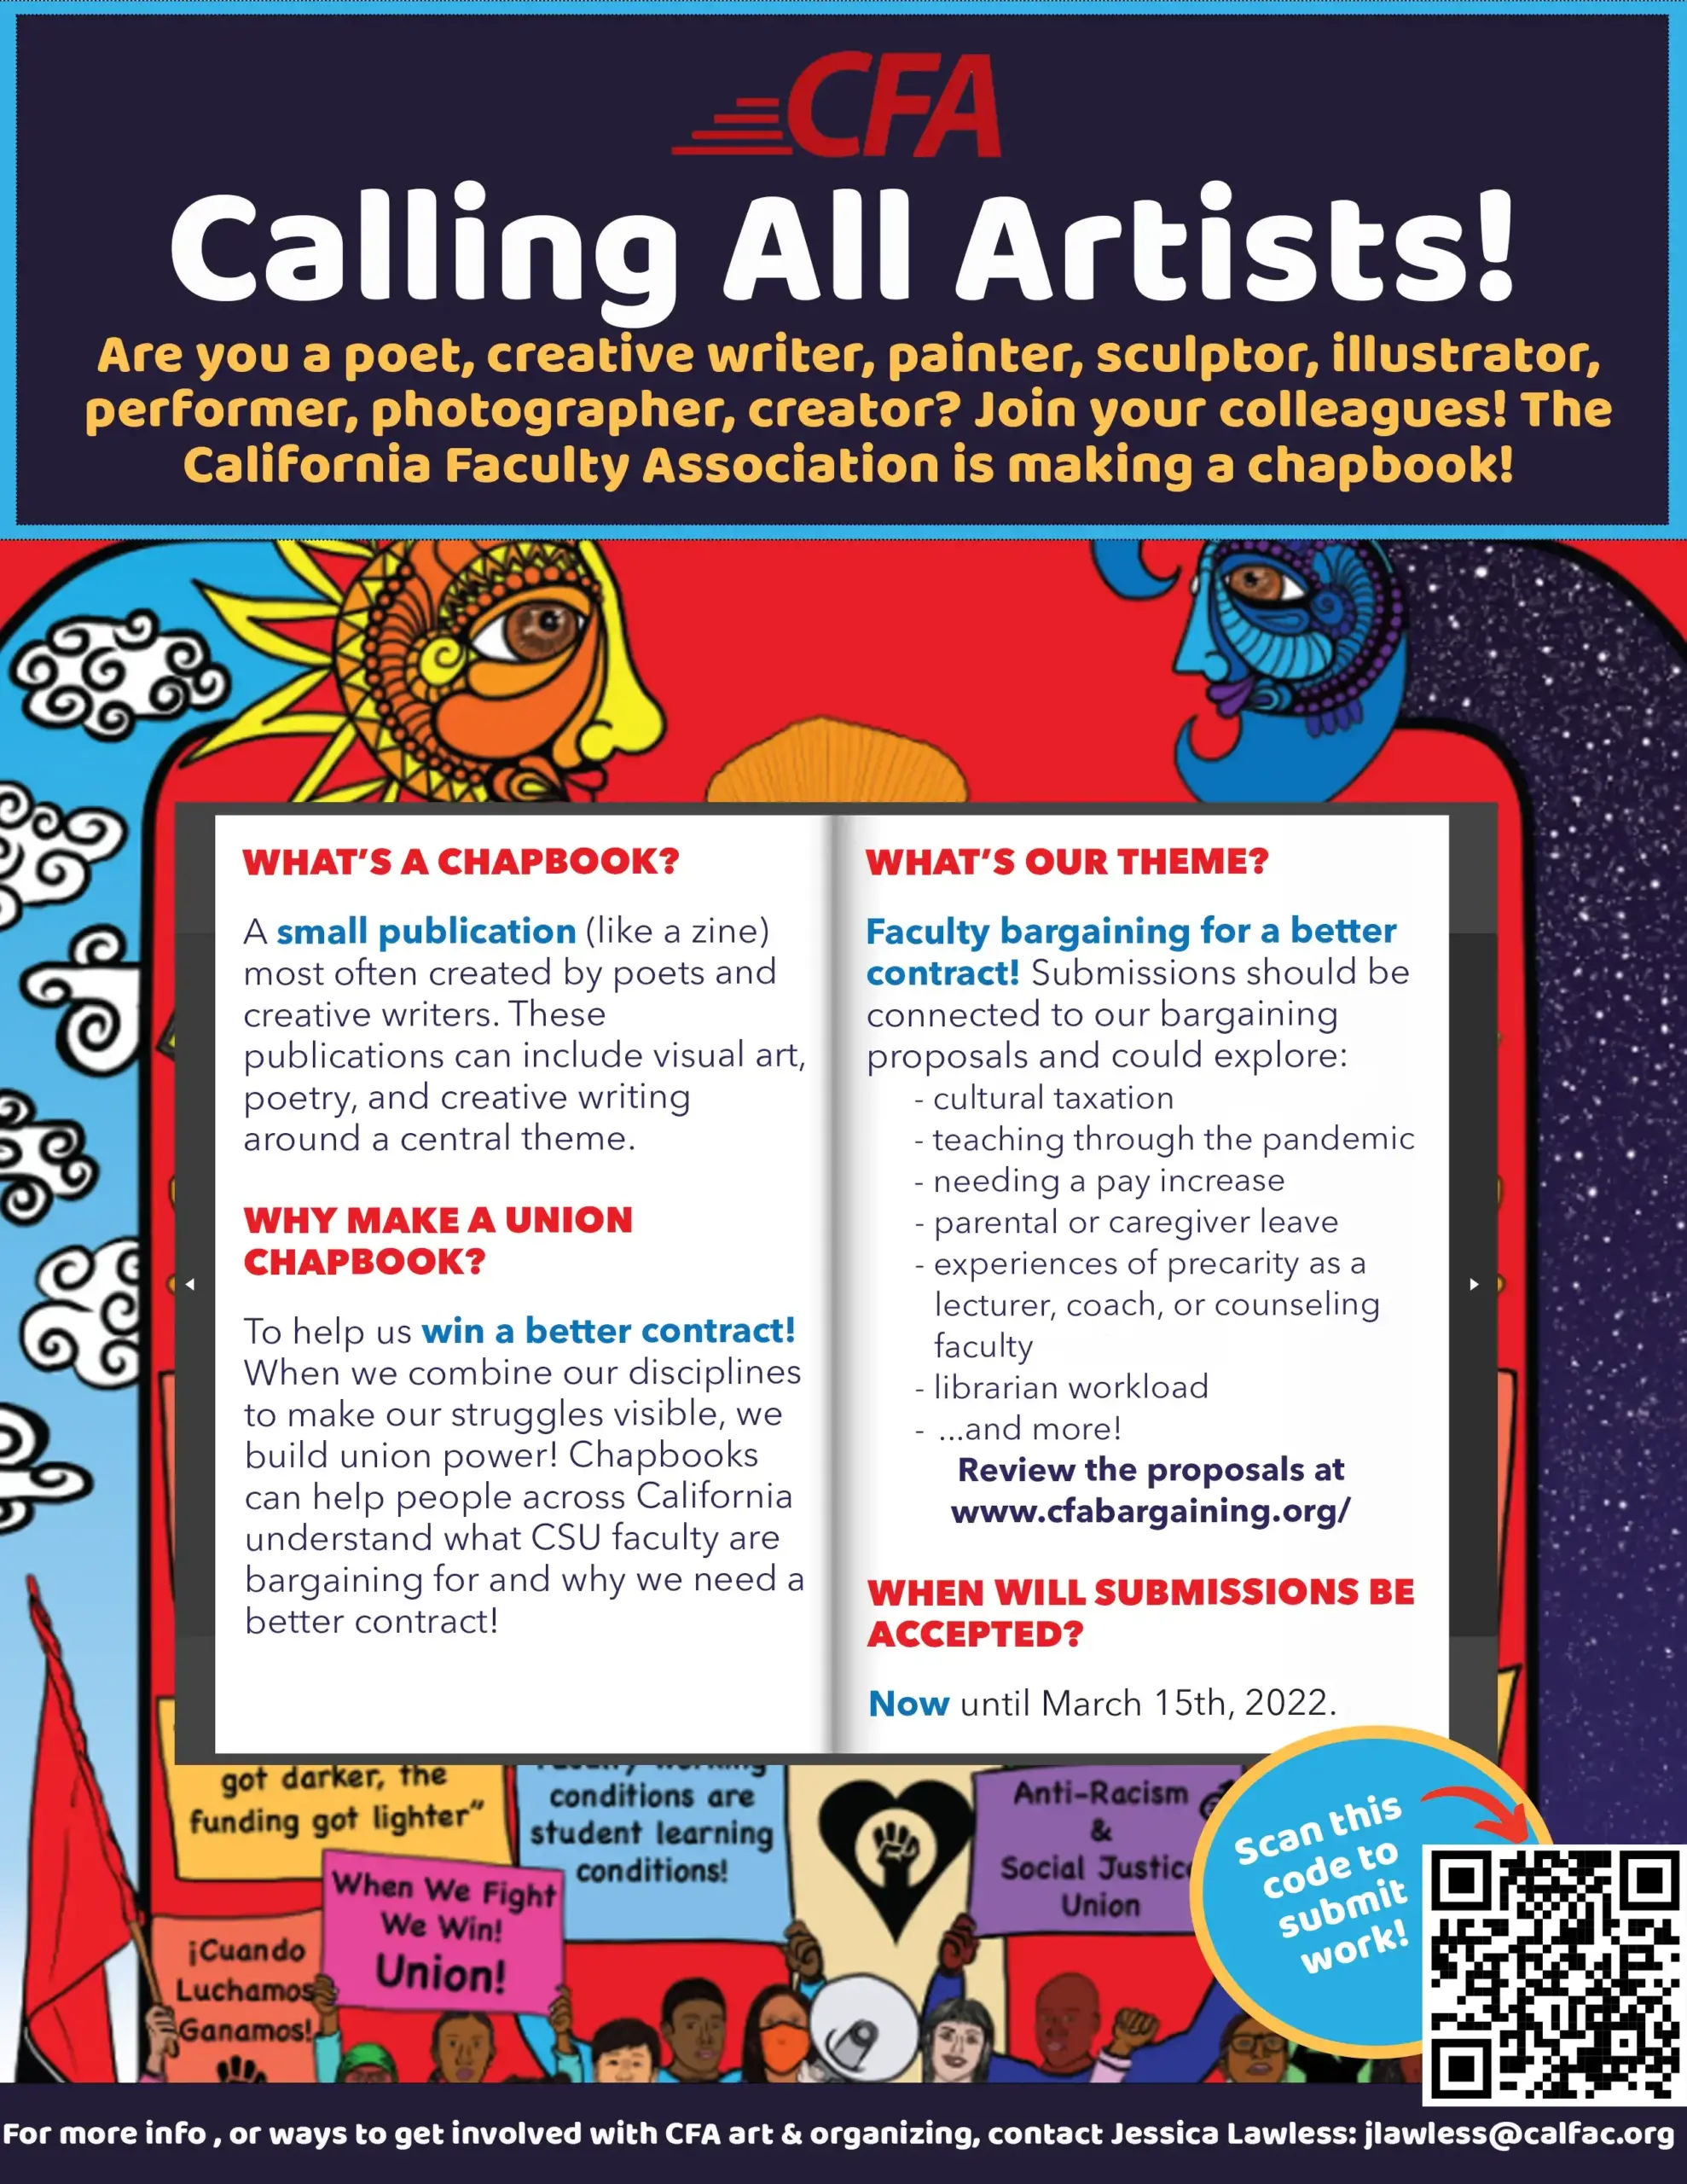 Image with text for reading Calling All Artists